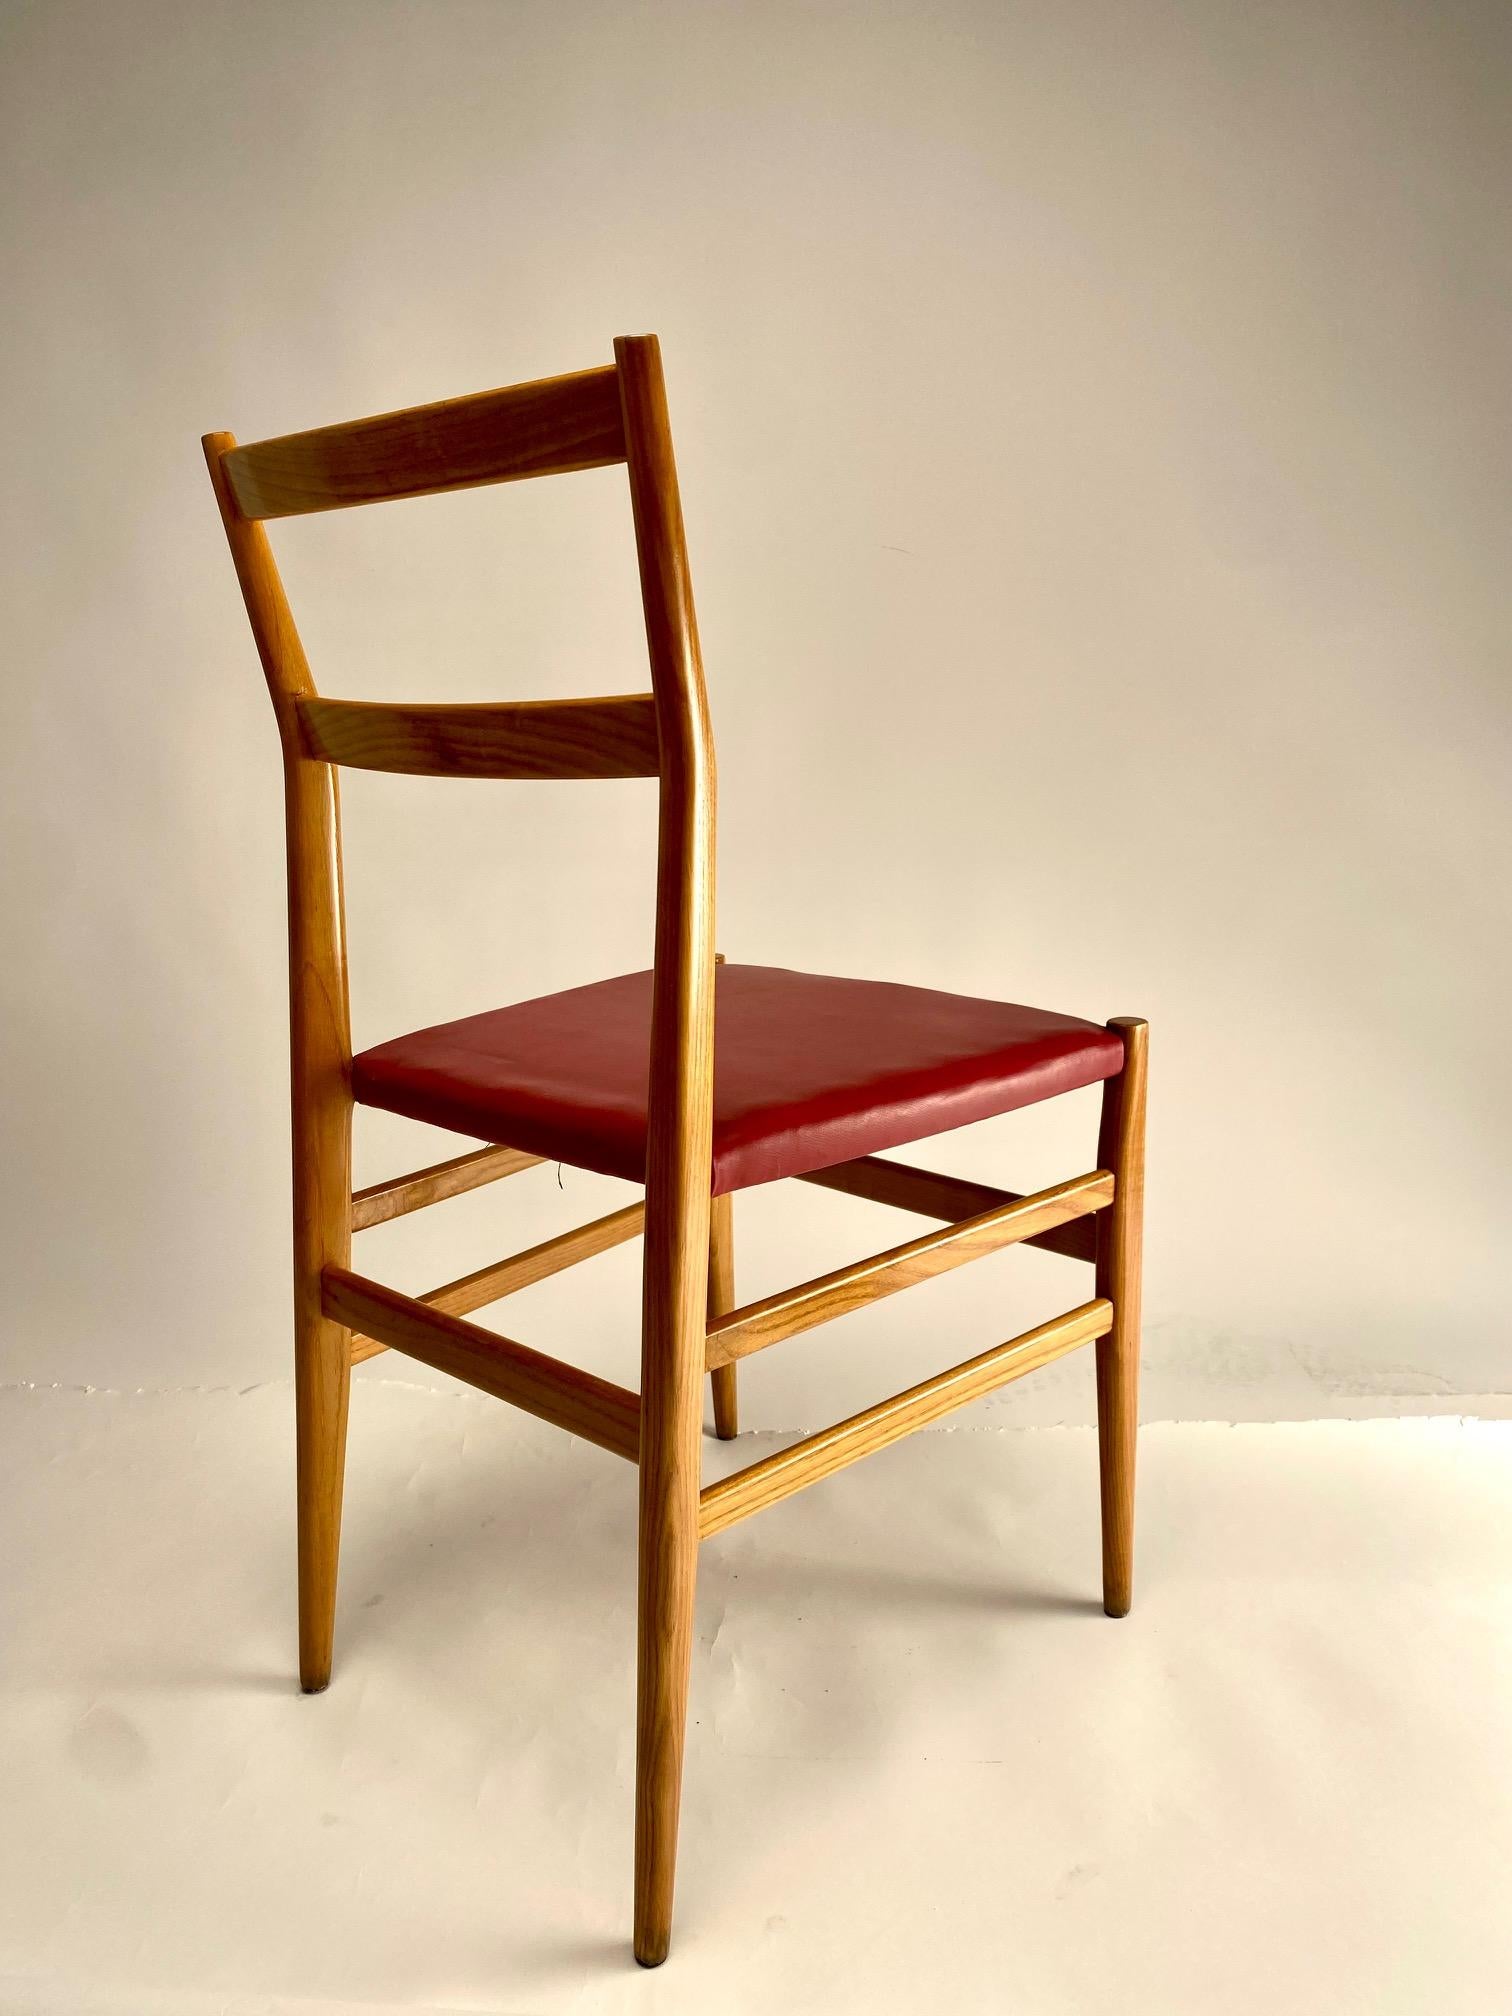 Italian Pair of Leggera chairs in light wood, Gio Ponti, Cassina  (First Edition) For Sale